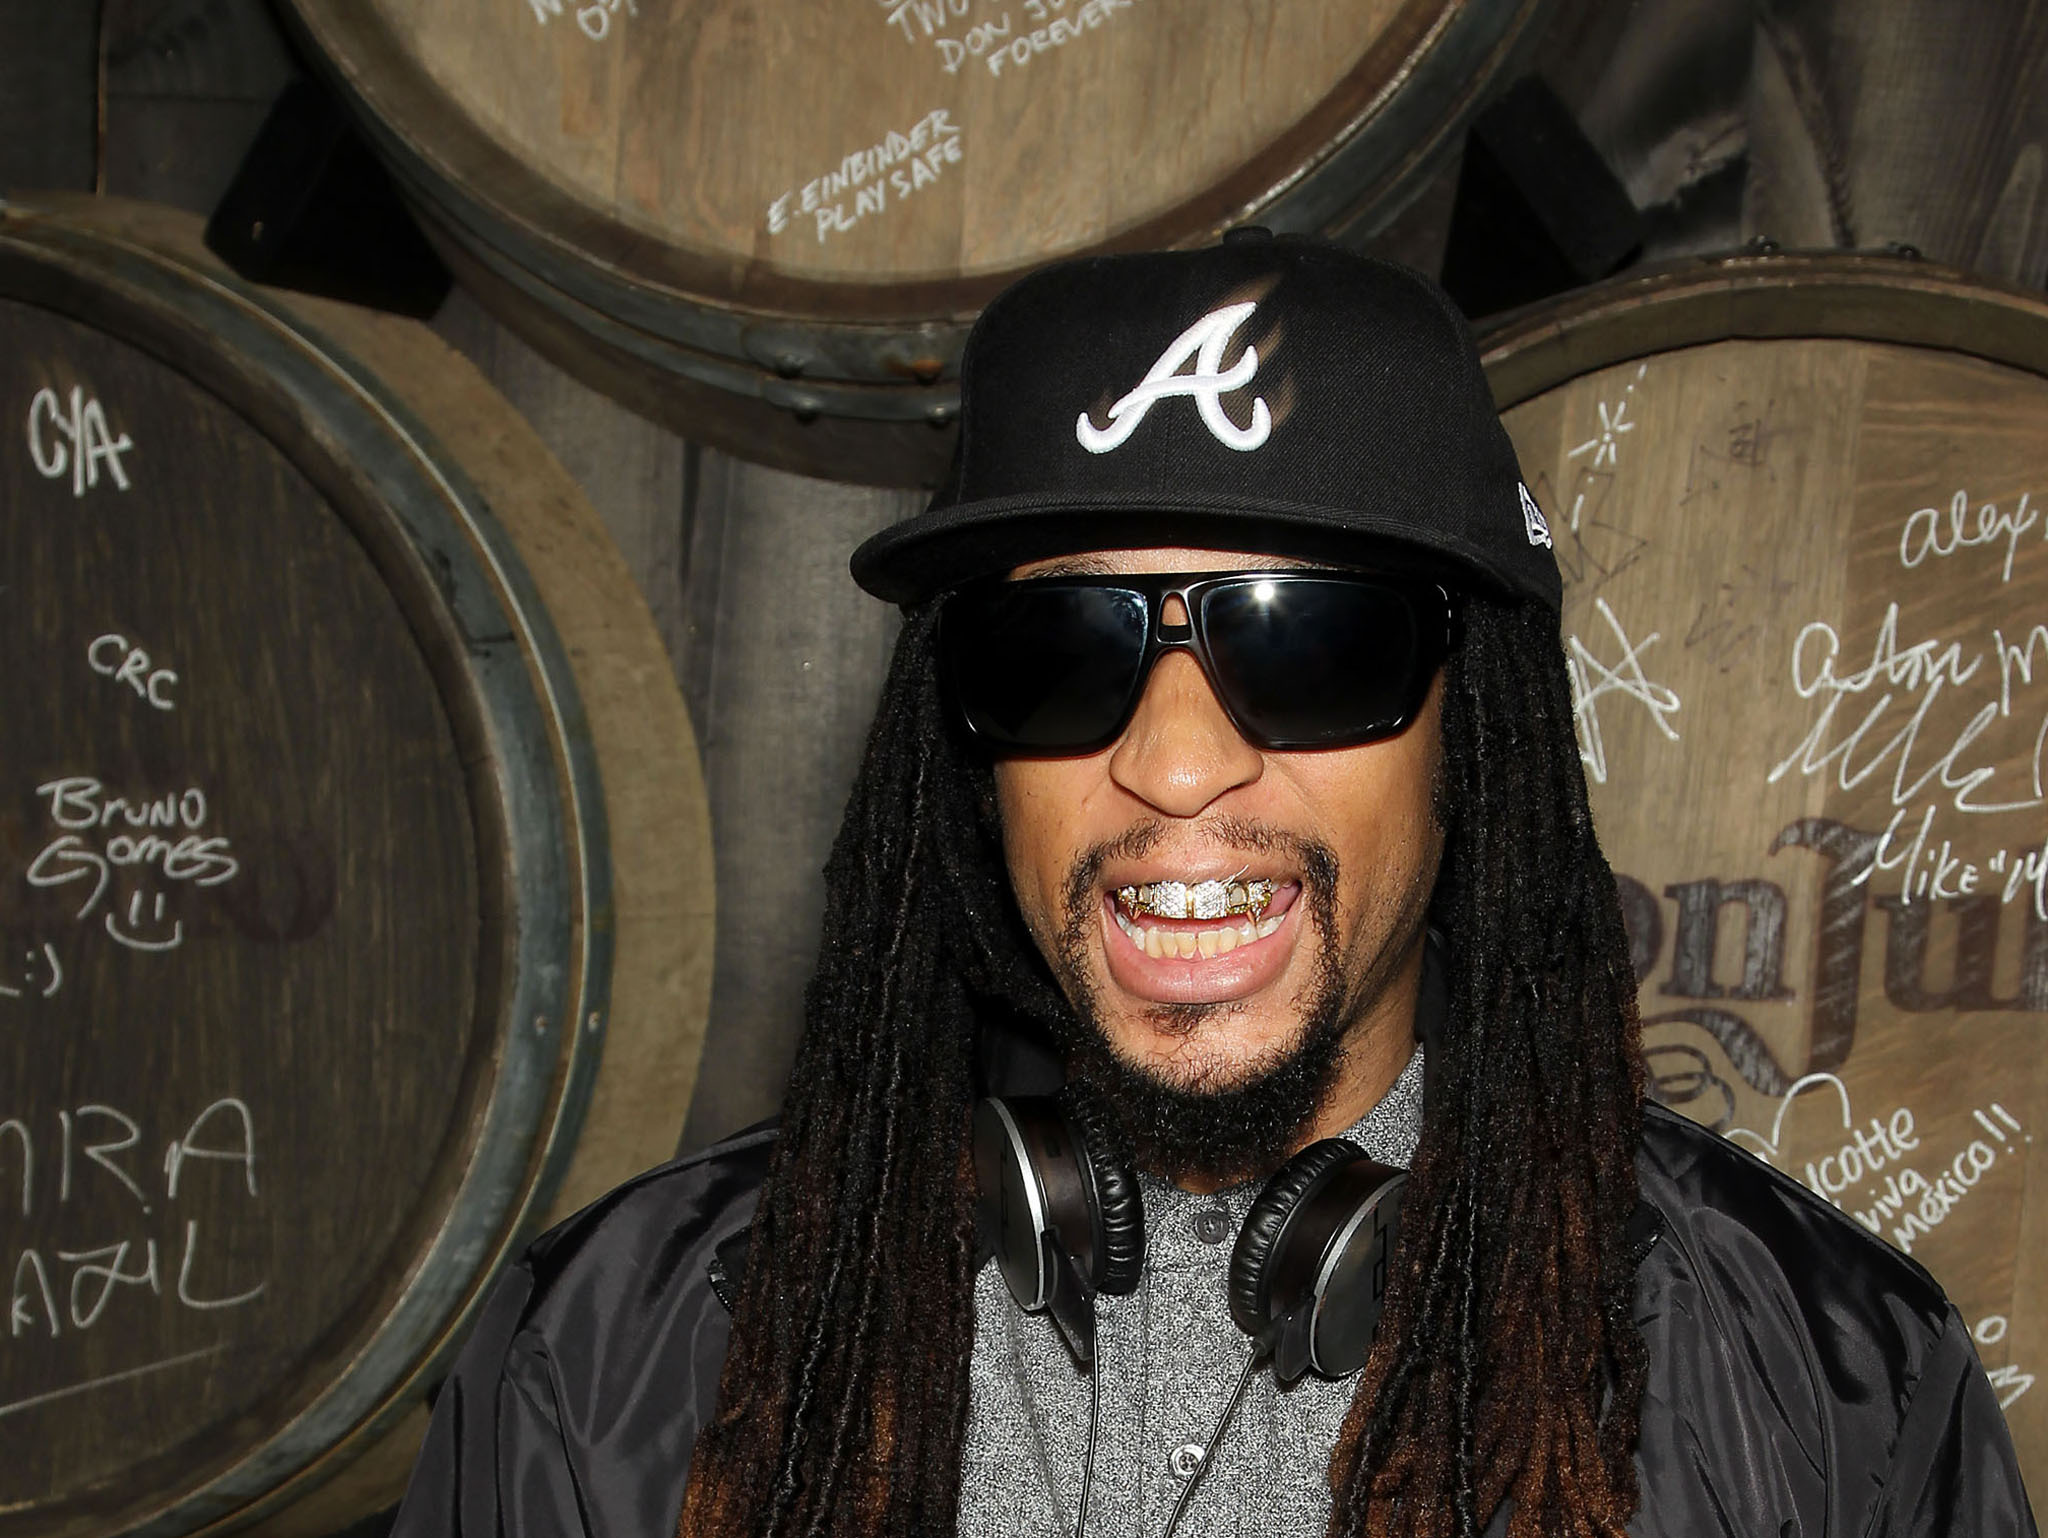 Download free Wallpapers of Lil Jon in high resolution and high quality. 